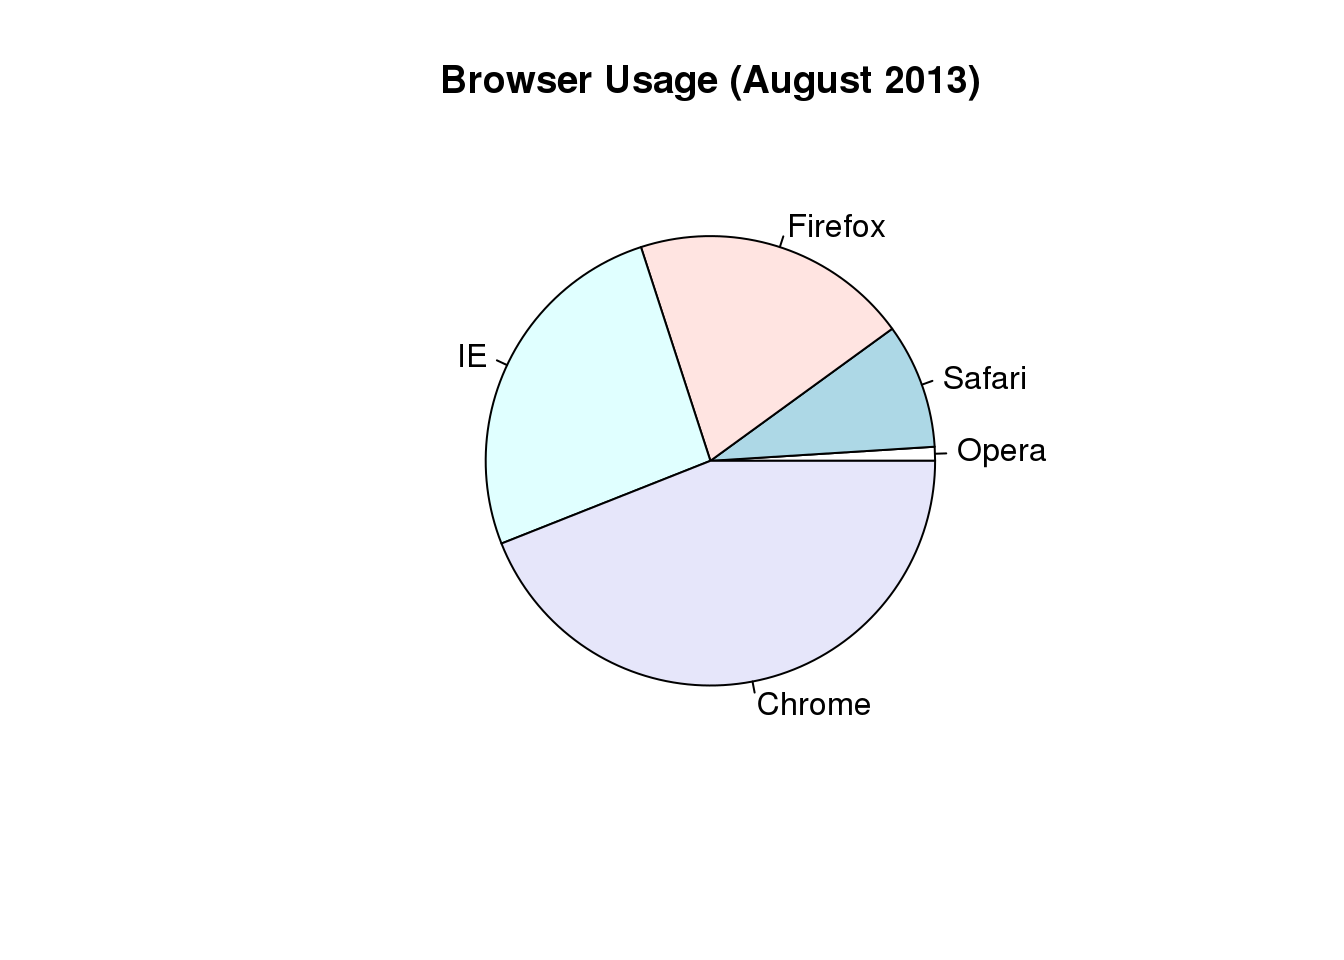 Pie chart of browser usage.